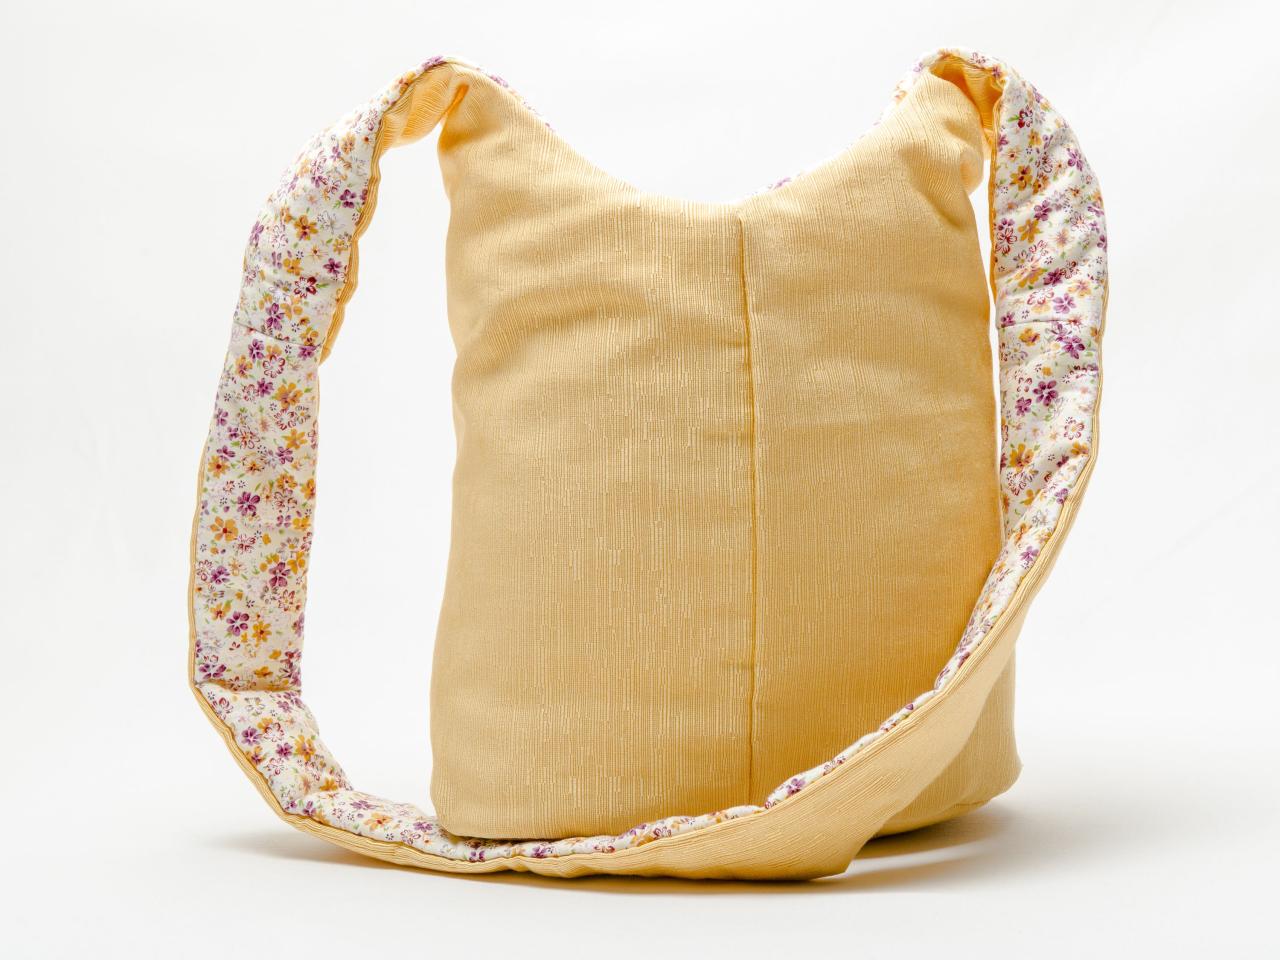 Affordable Cotton Hobo Bags Wholesale - Stylish and Sustainable Fashion Accessories